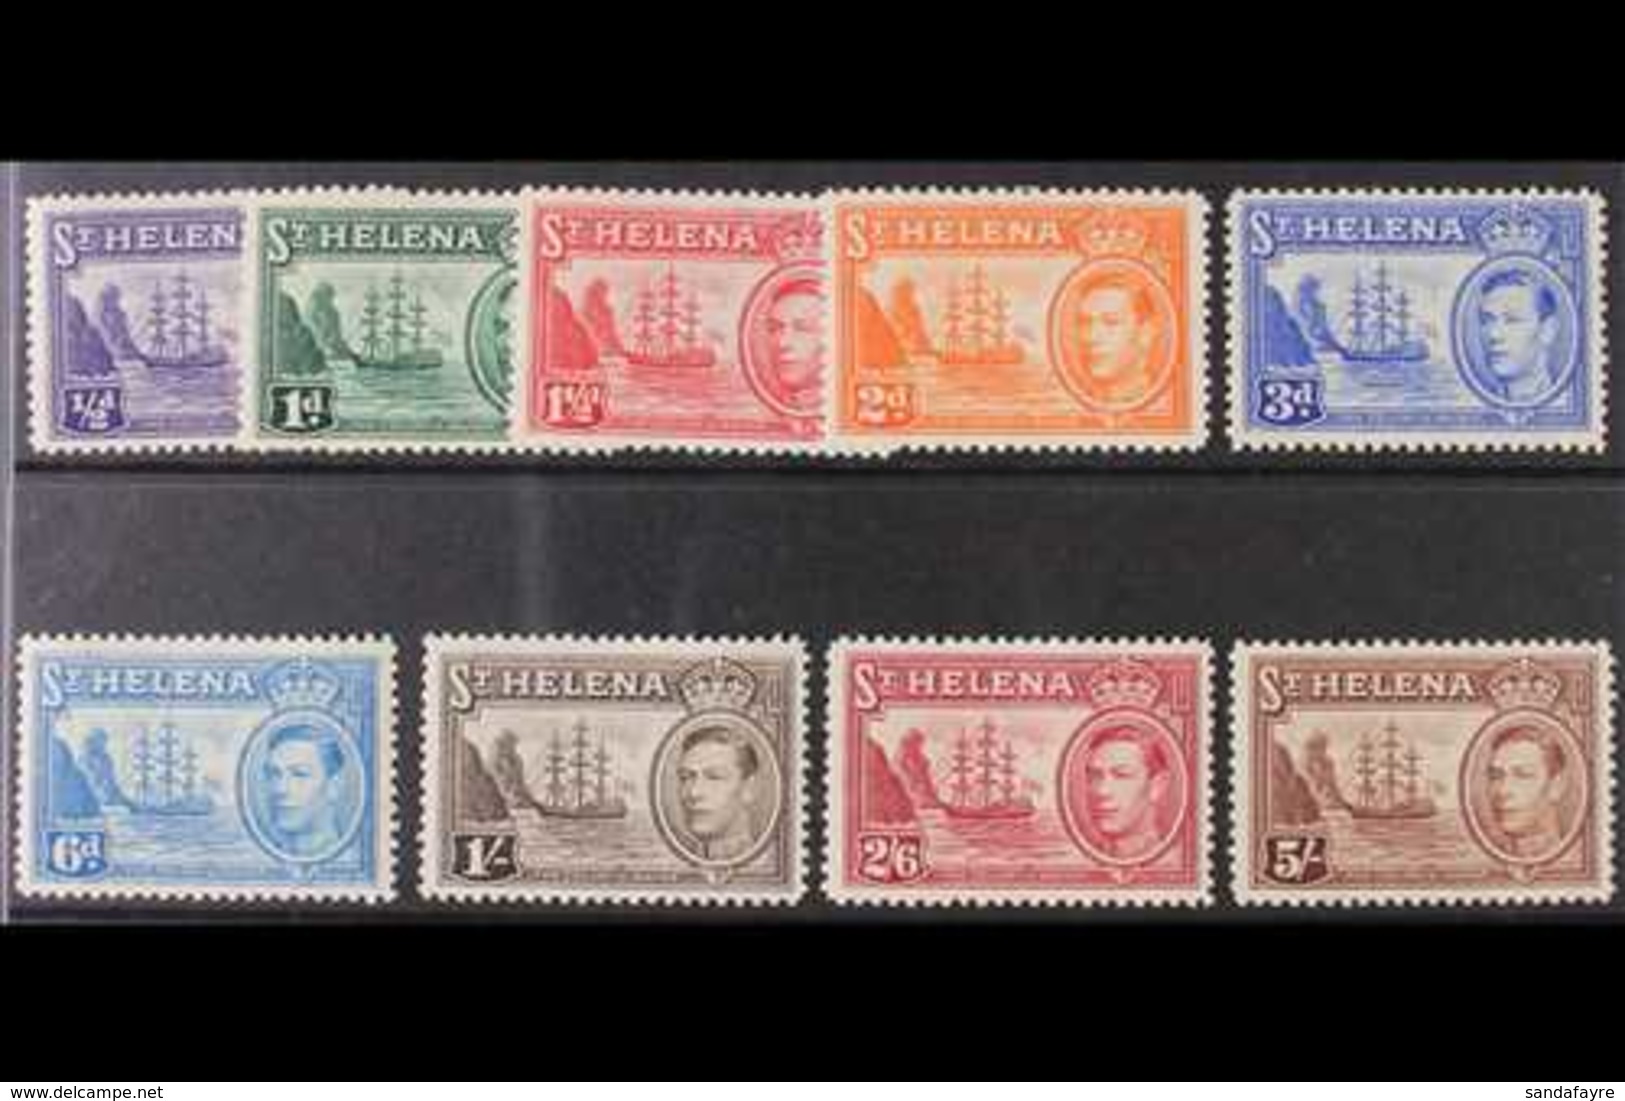 1938 KGVI Definitives Original Set To 5s (SG 131/39) Including The Scarce 3d Ultramarine, Never Hinged Mint. (9 Stamps)  - Saint Helena Island